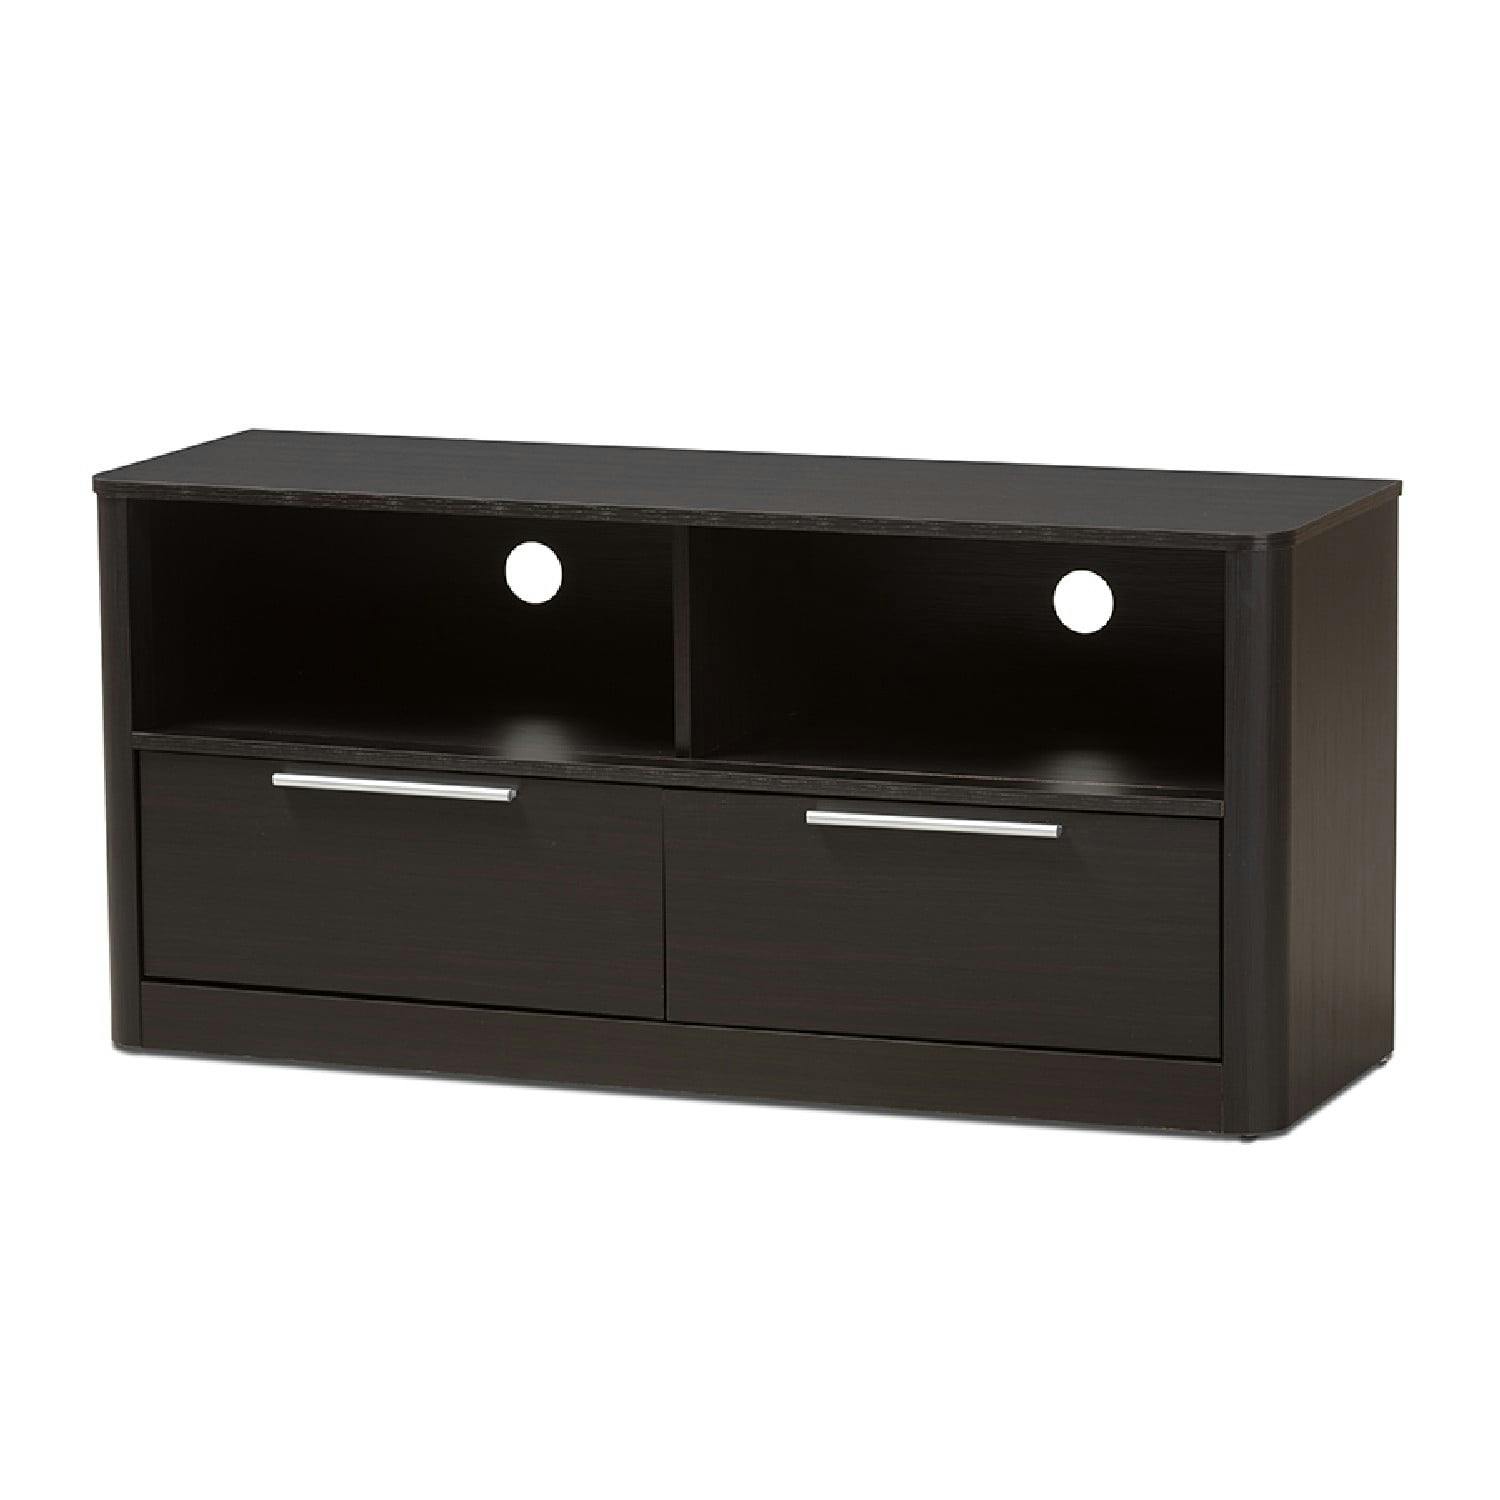 Carlingford Espresso Brown 48" Modern TV Stand with 2 Drawers